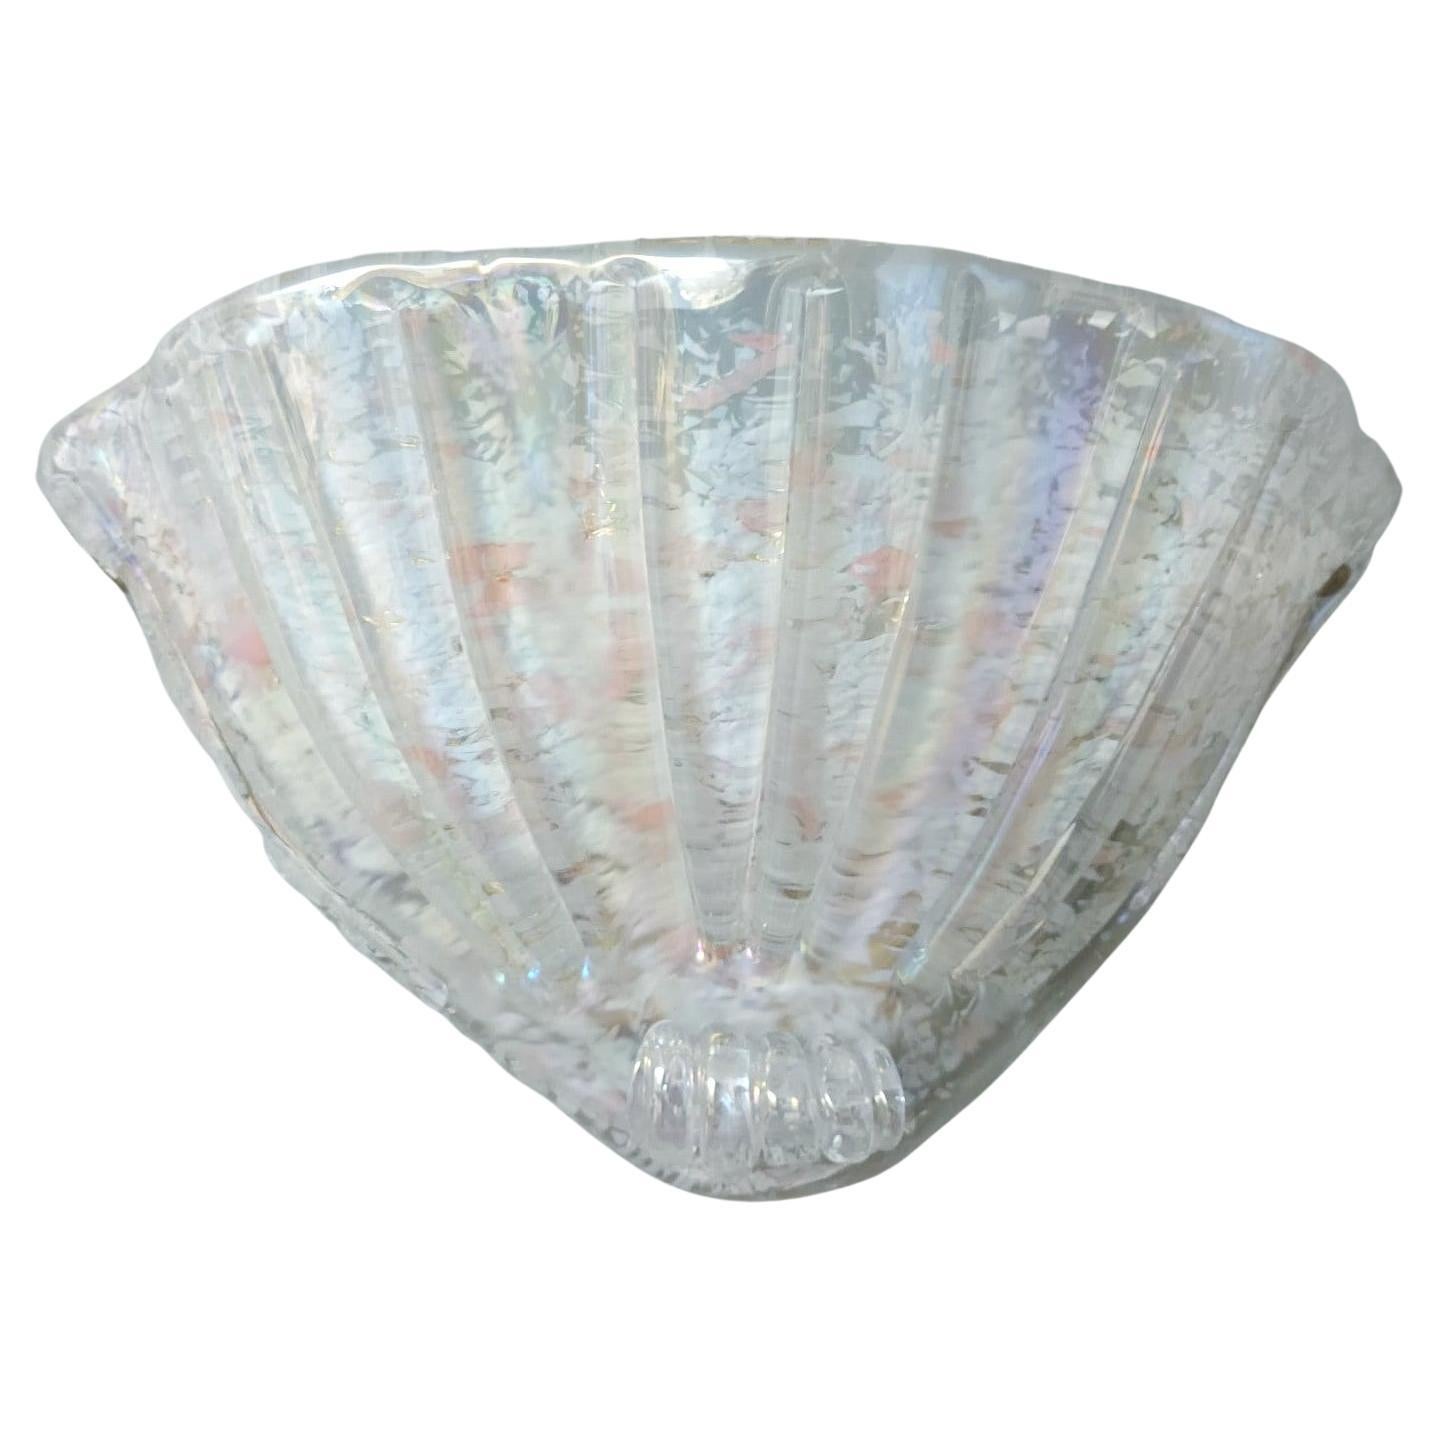 Uplight Shell Sconces, 7 Available